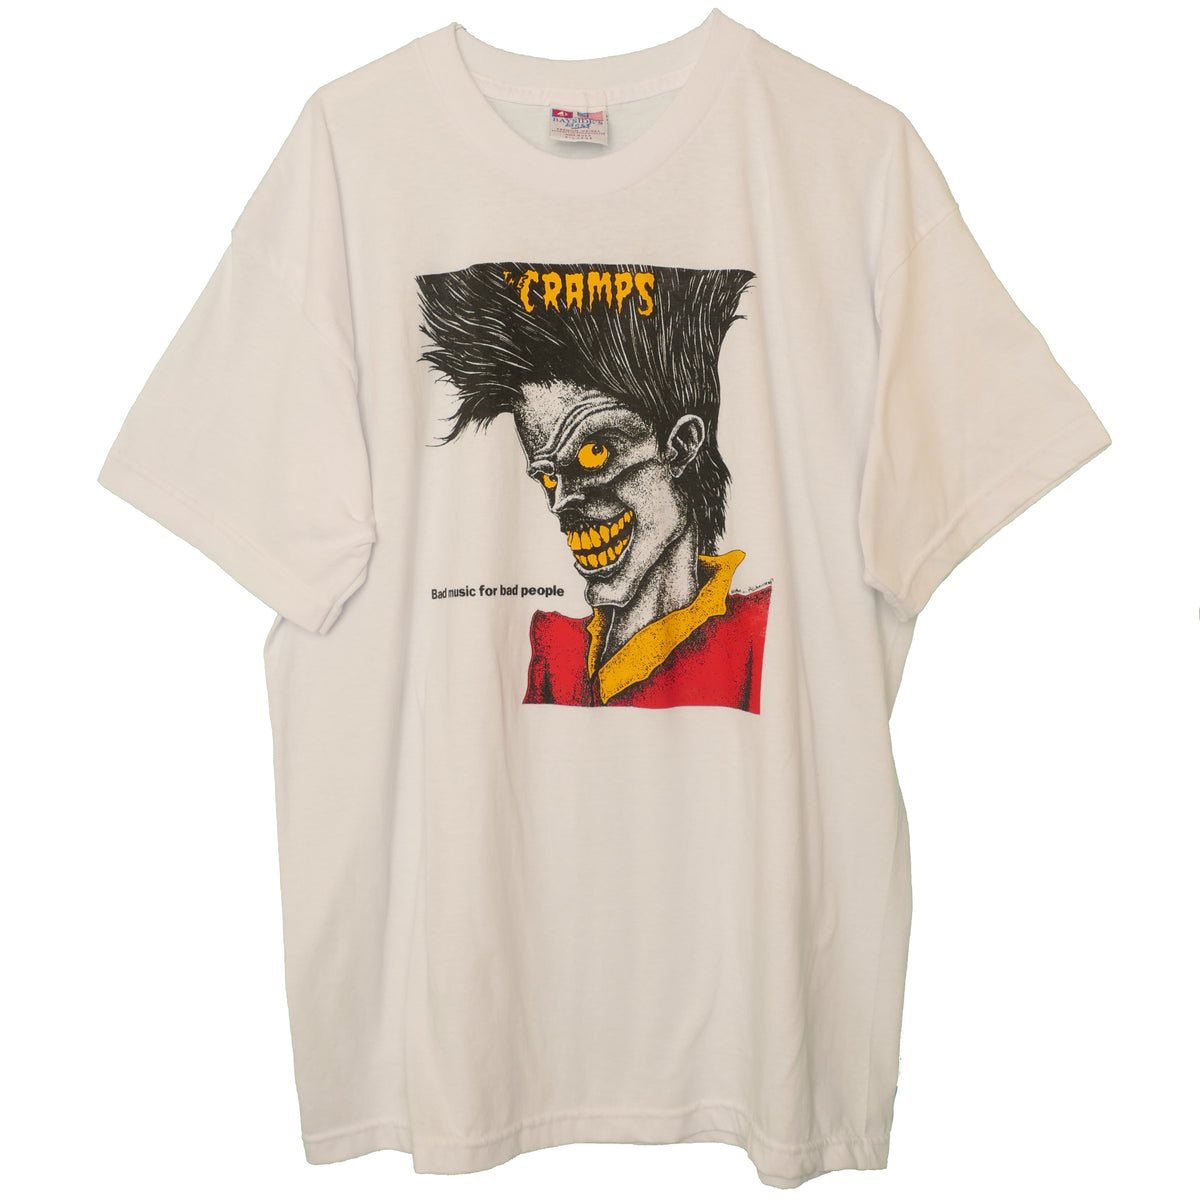 The Cramps Bad Music Tee